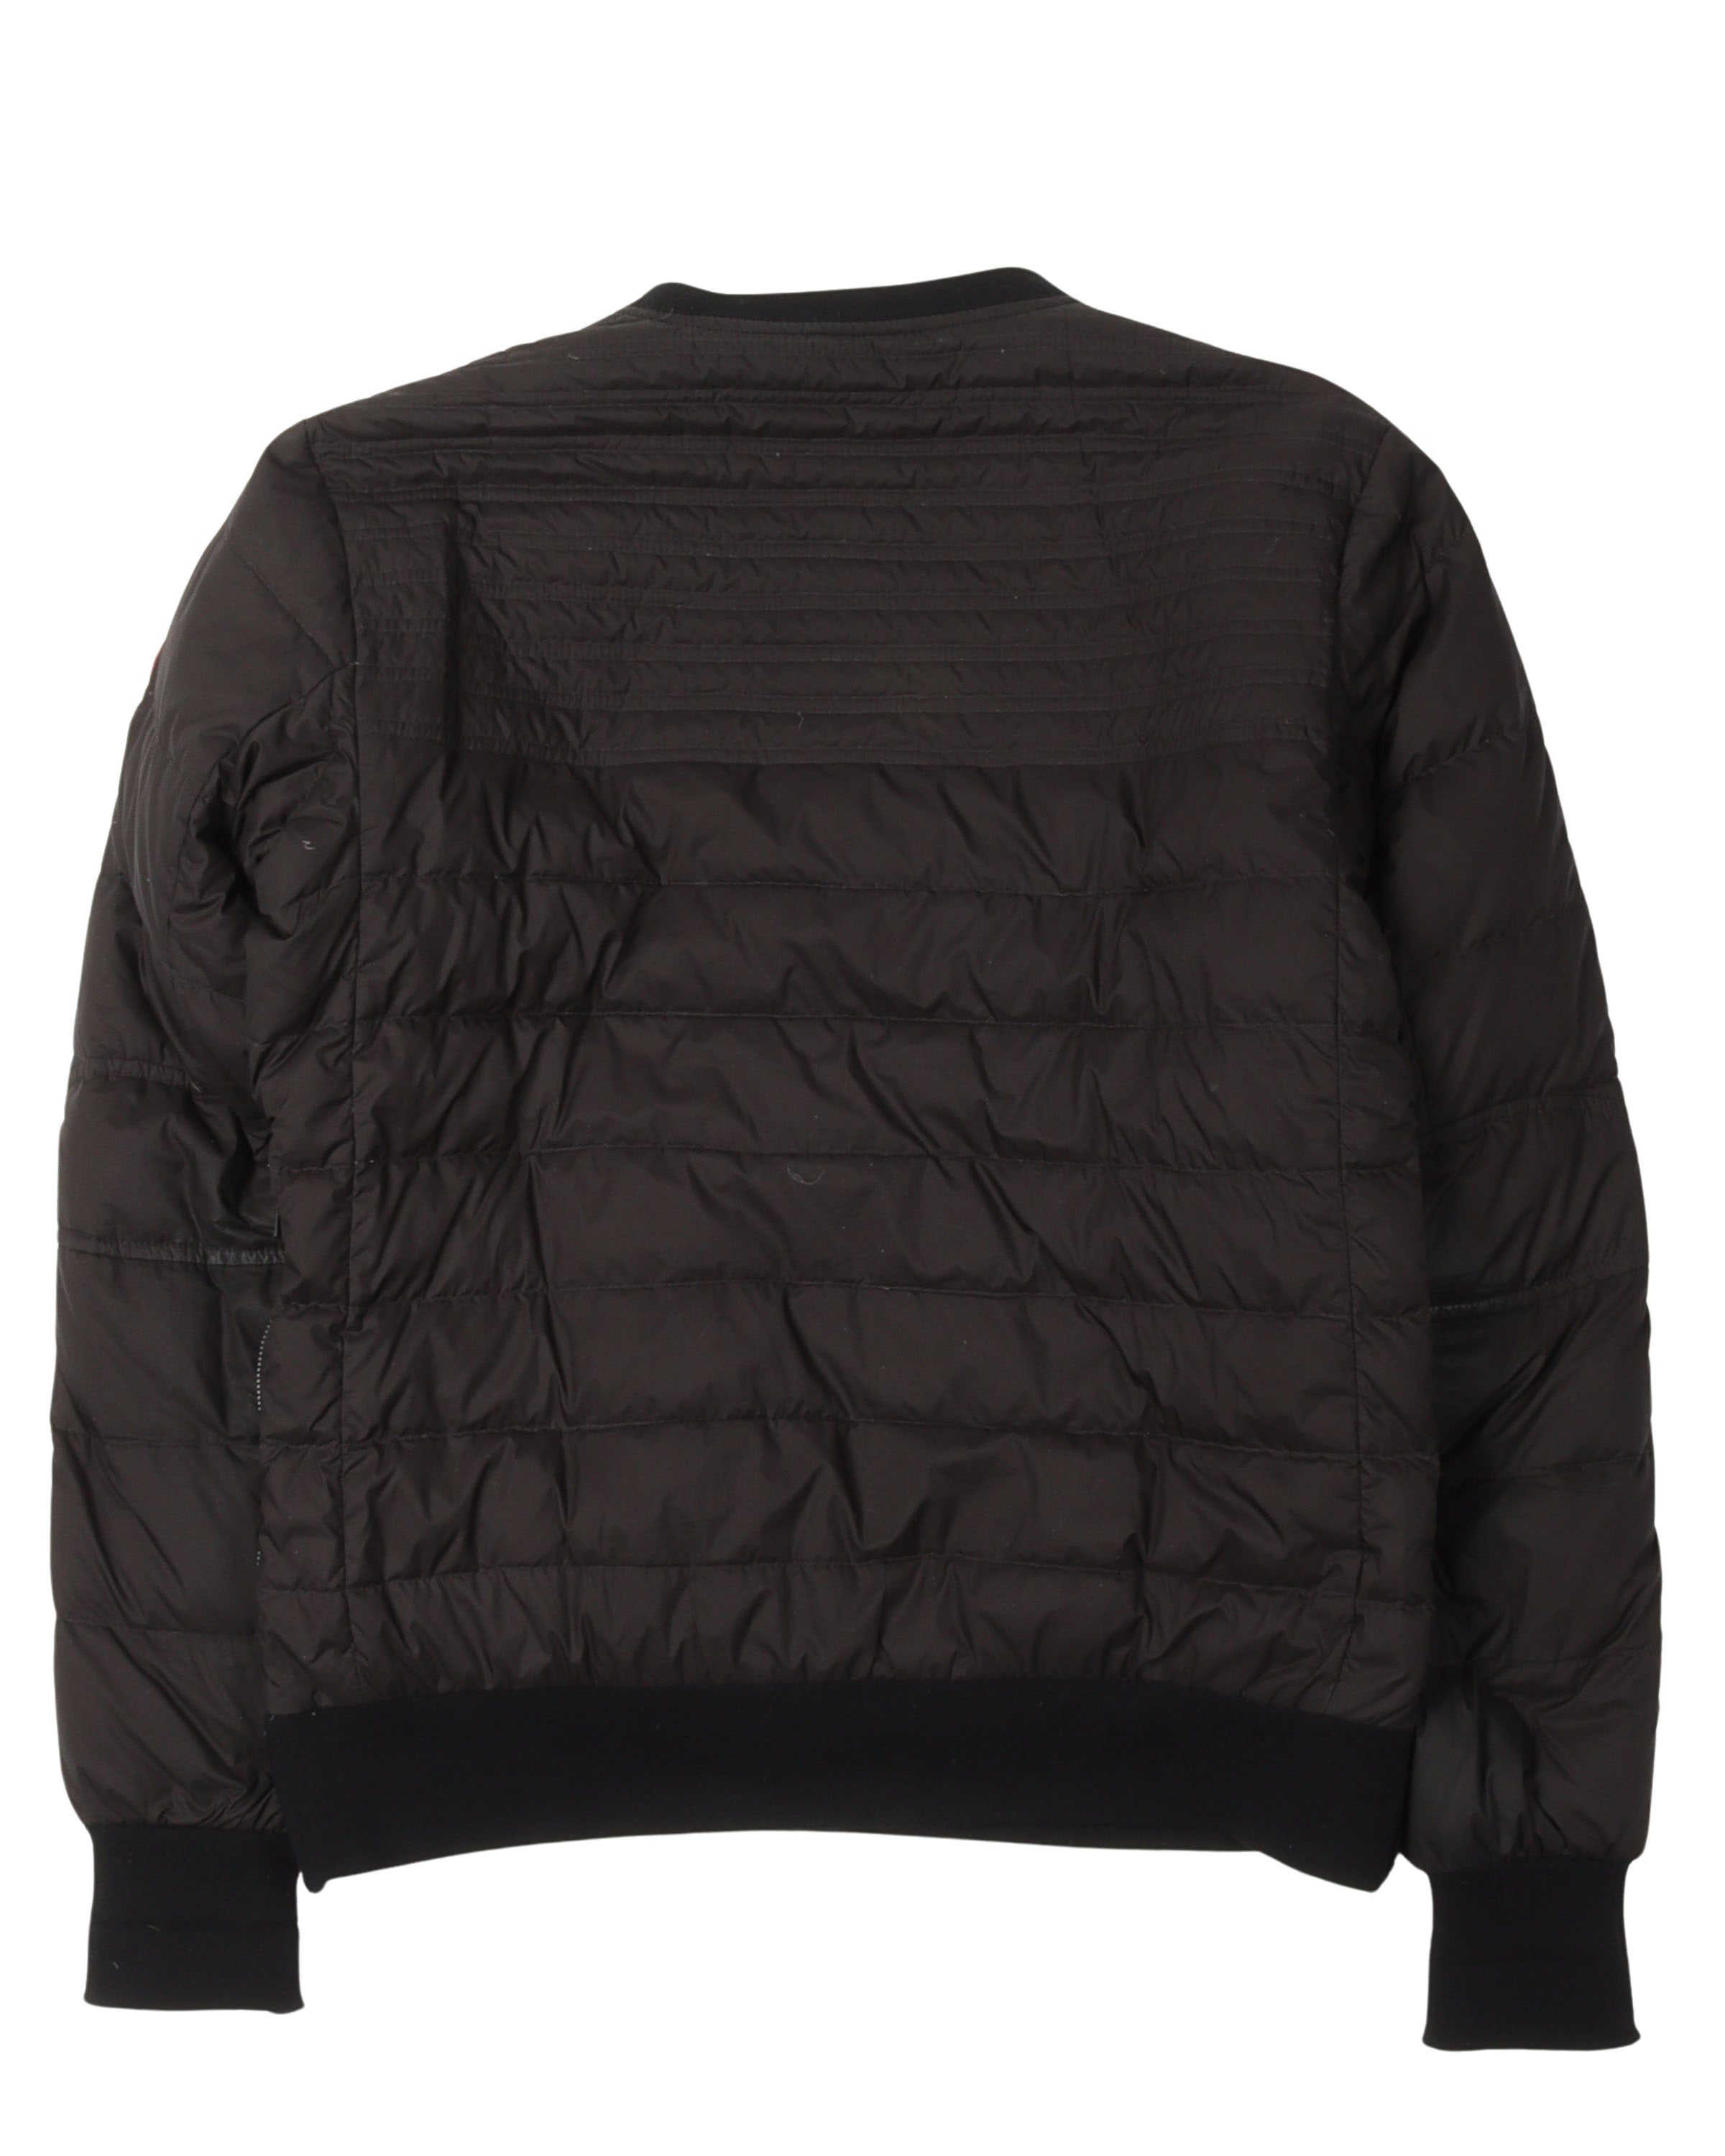 Albanny Quilted Down Sweatshirt